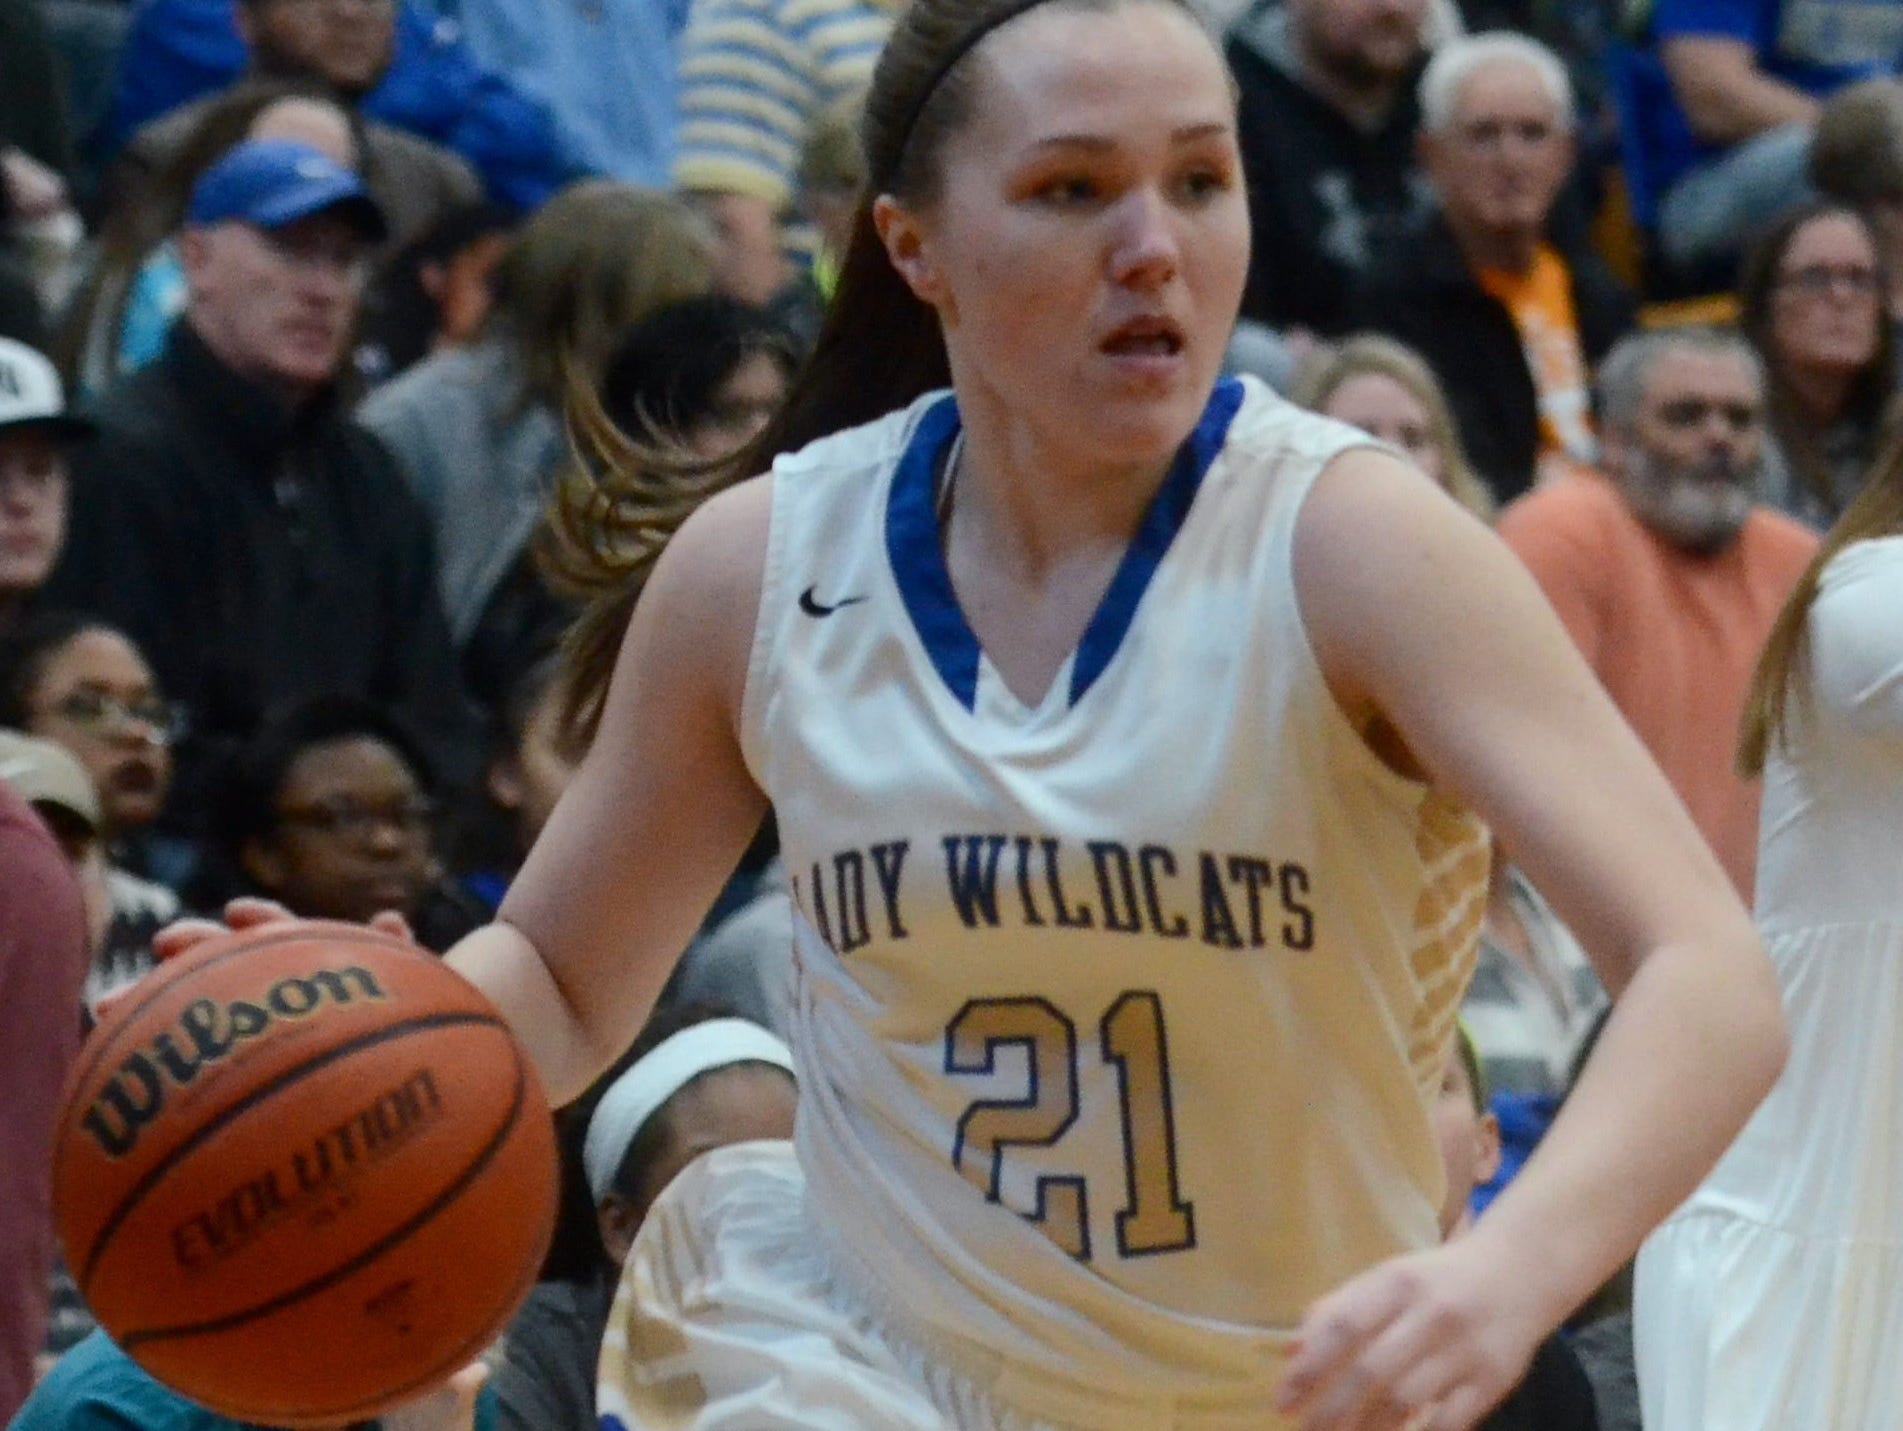 Wilson Central's Kendall Spray scored 10 second-quarter points in Saturday's Class AAA sectional matchup against visiting Ravenwood.